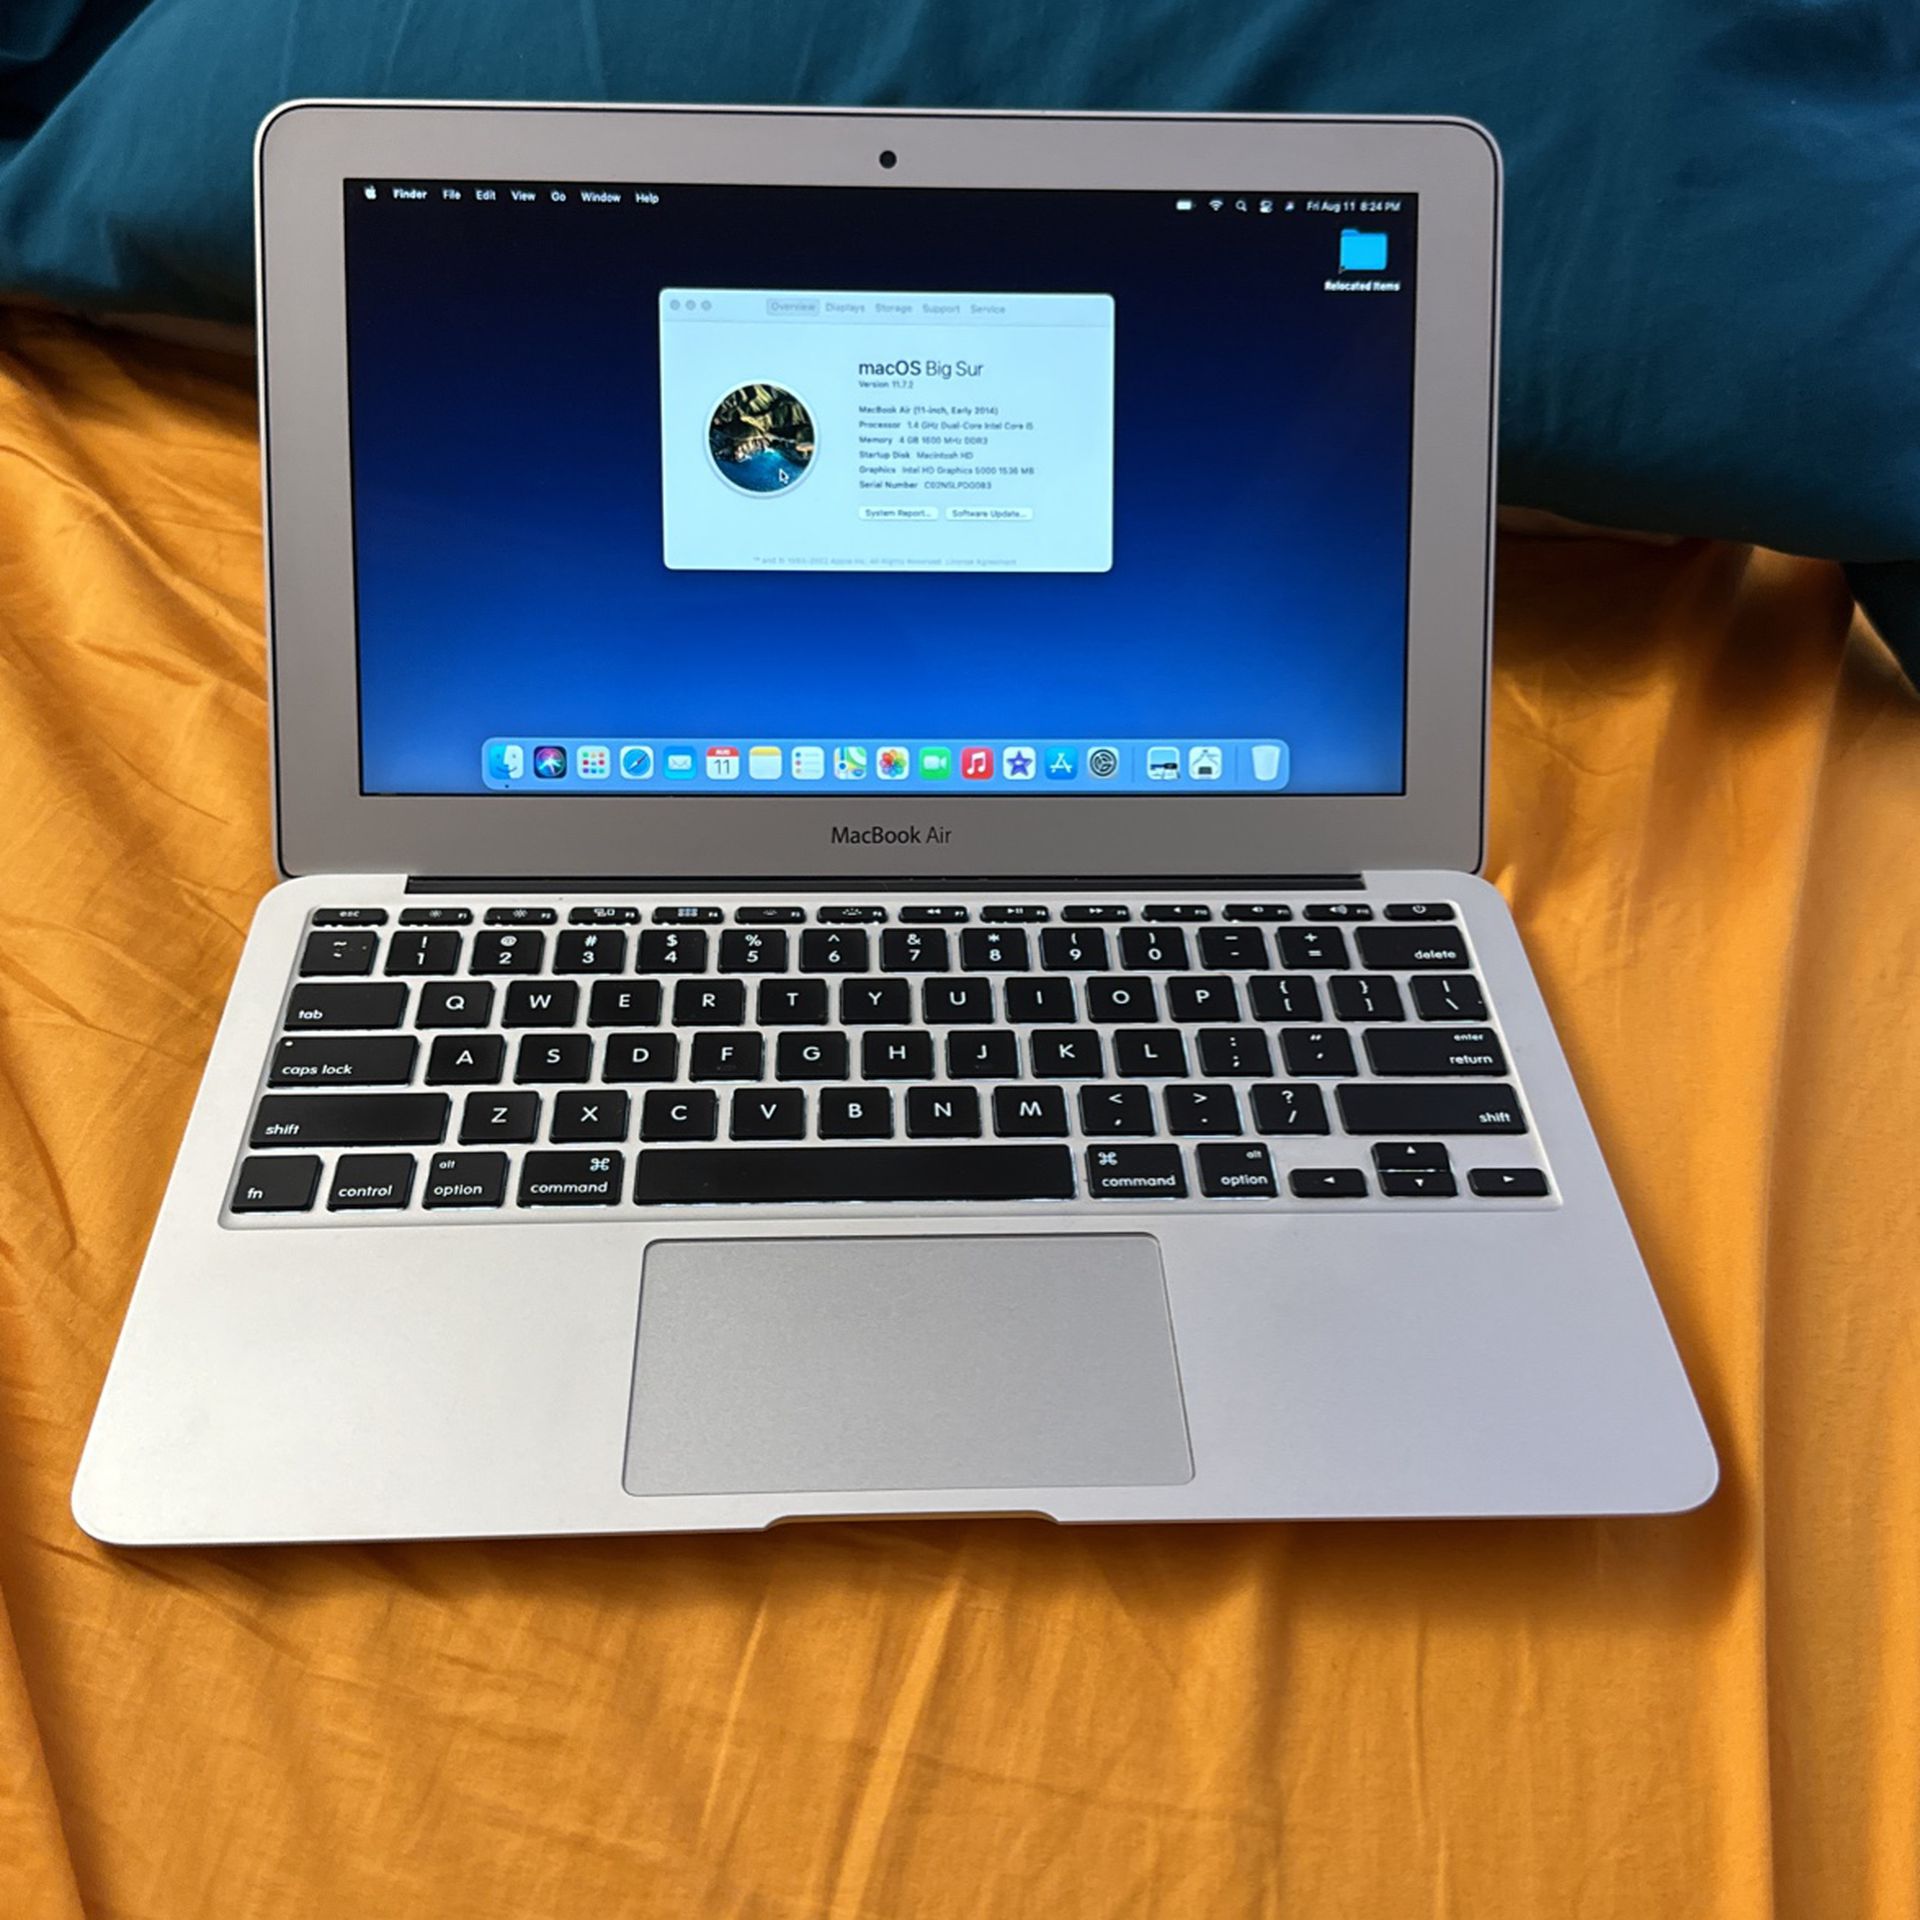 MacBook Air 11 Inch 2014 Mac OS BigSur for Sale in Lake Forest